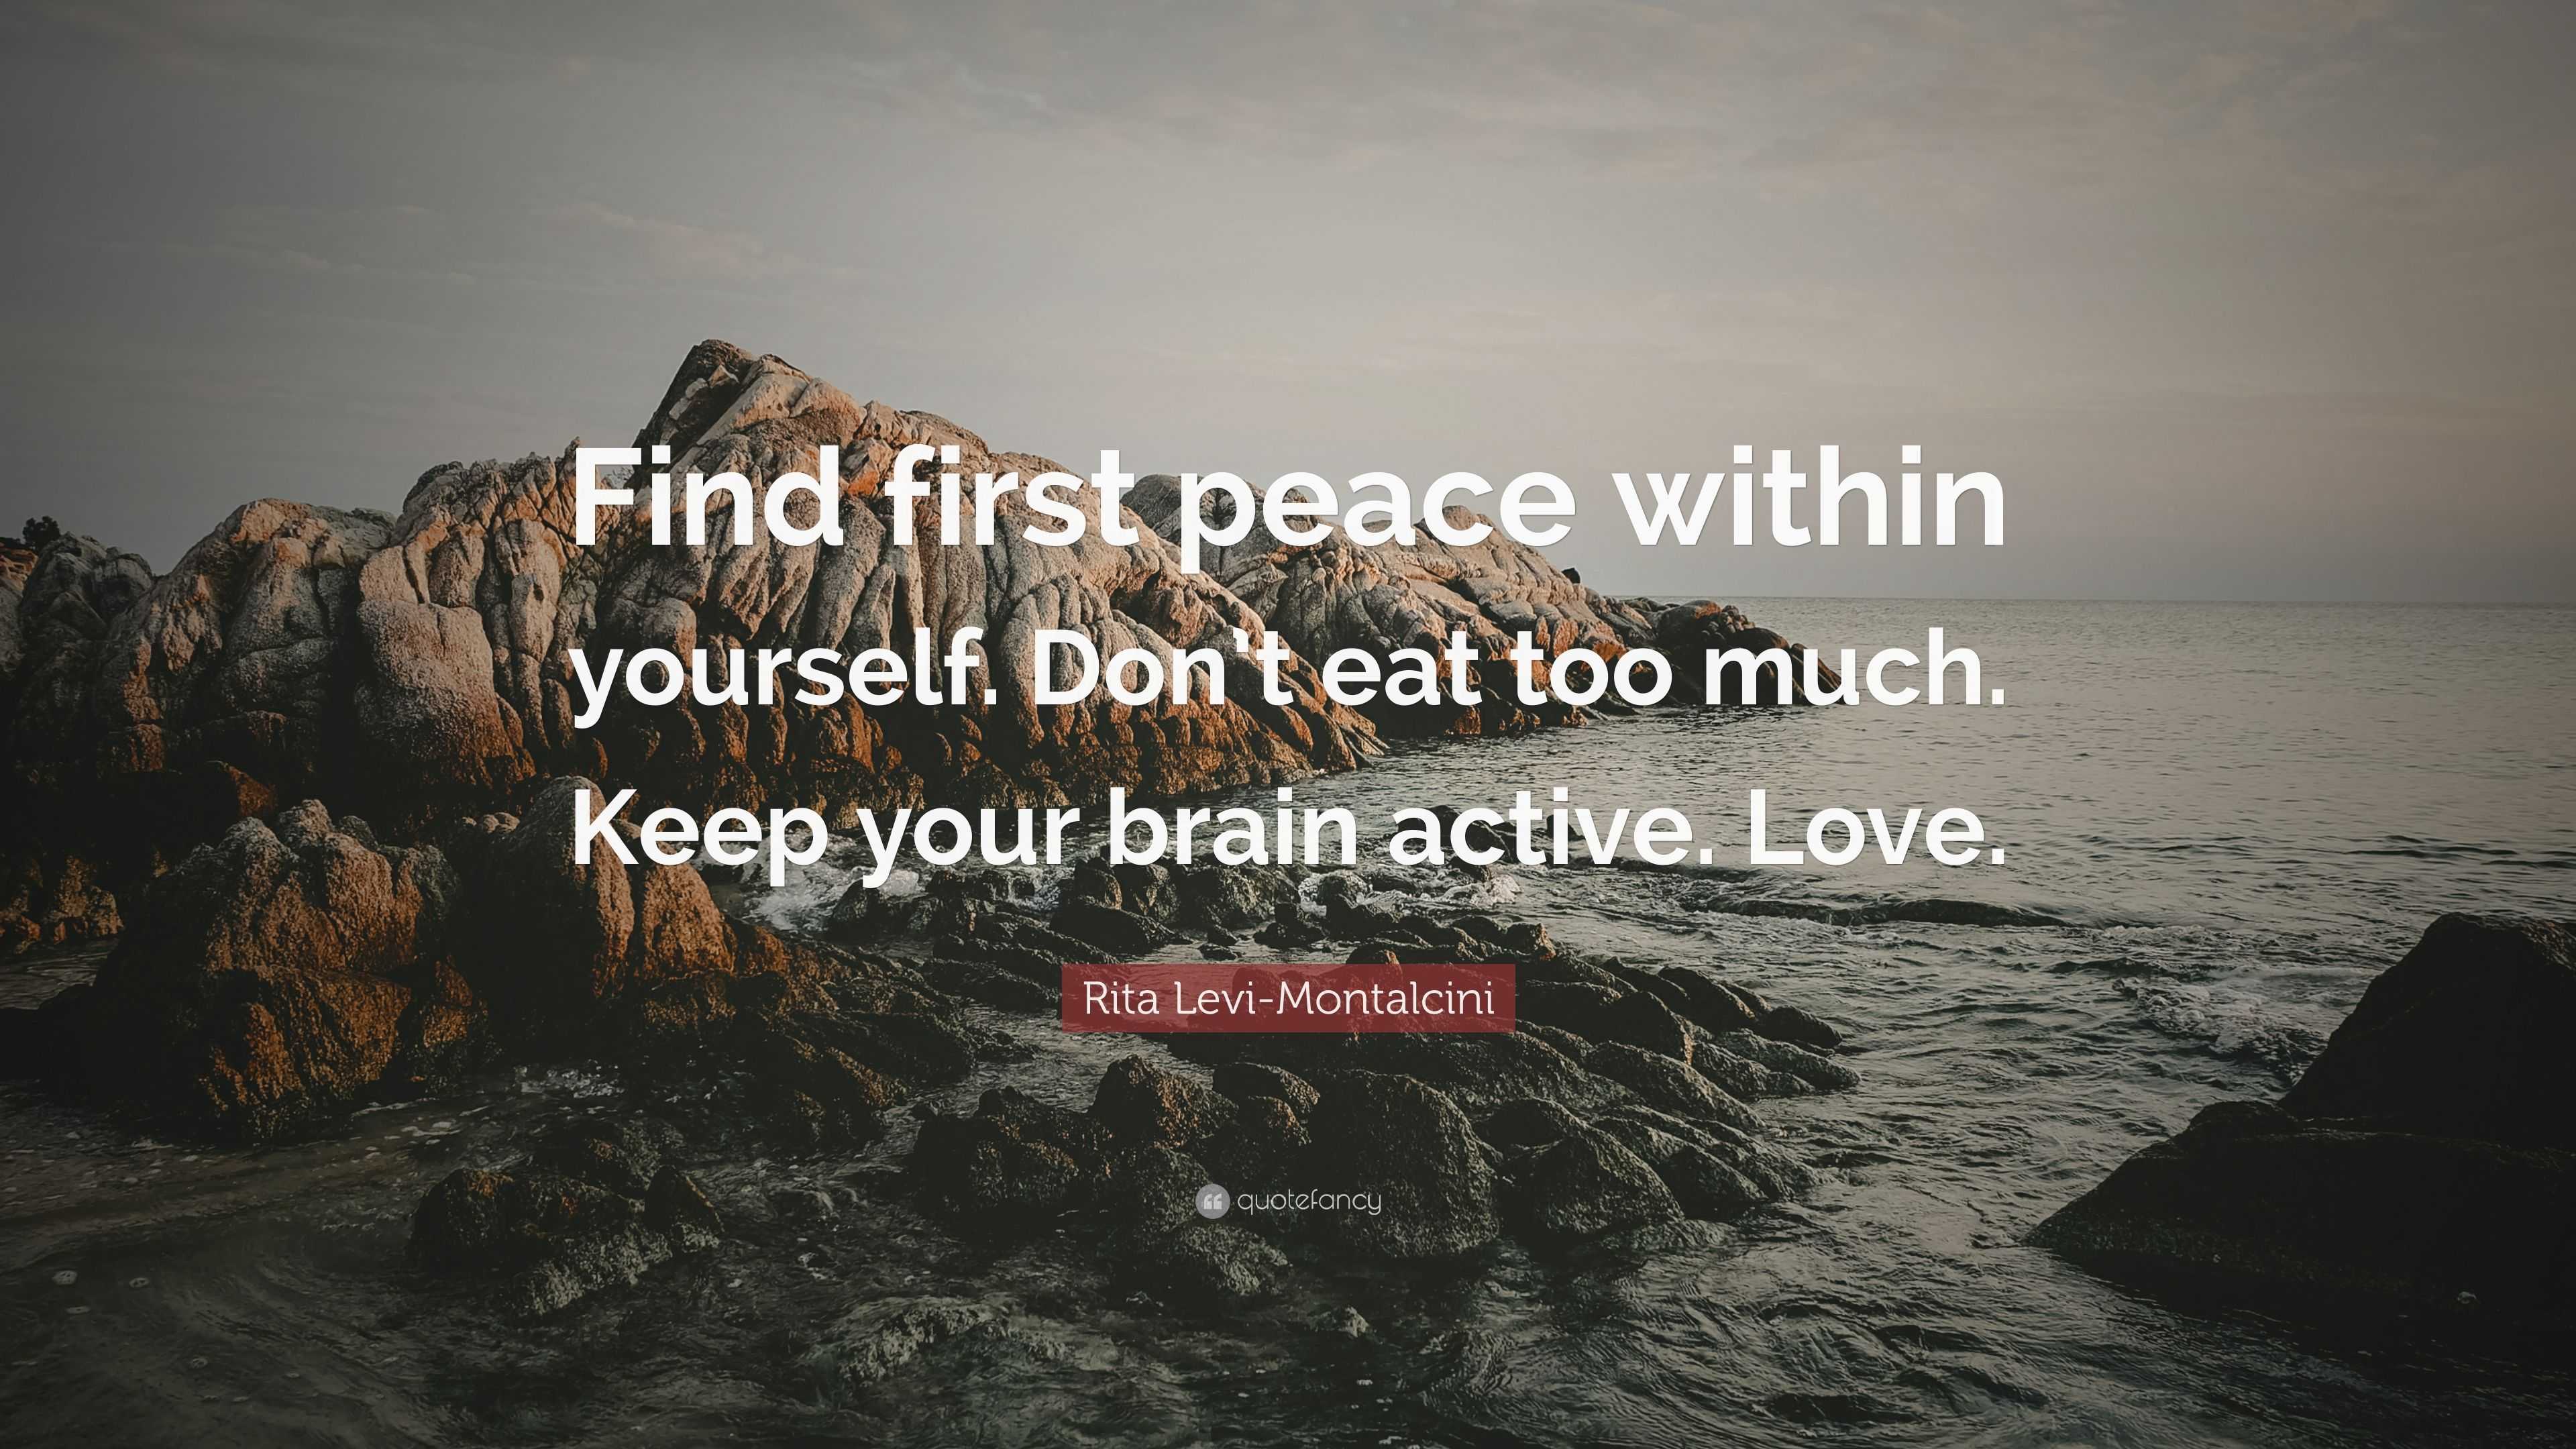 Rita Levi Montalcini Quote “Find first peace within yourself Don t